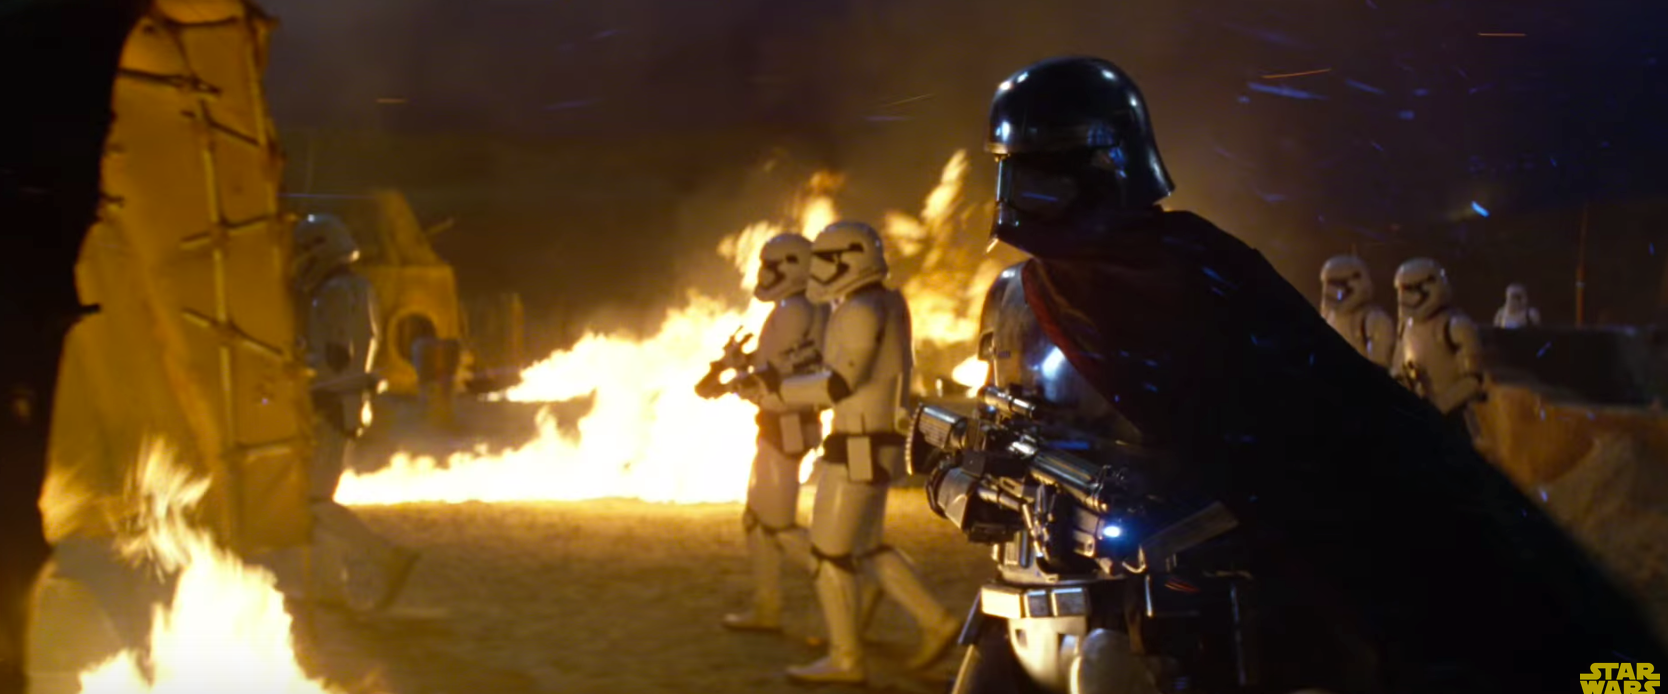 Star Wars: The Force Awakens Official Trailer YouTube